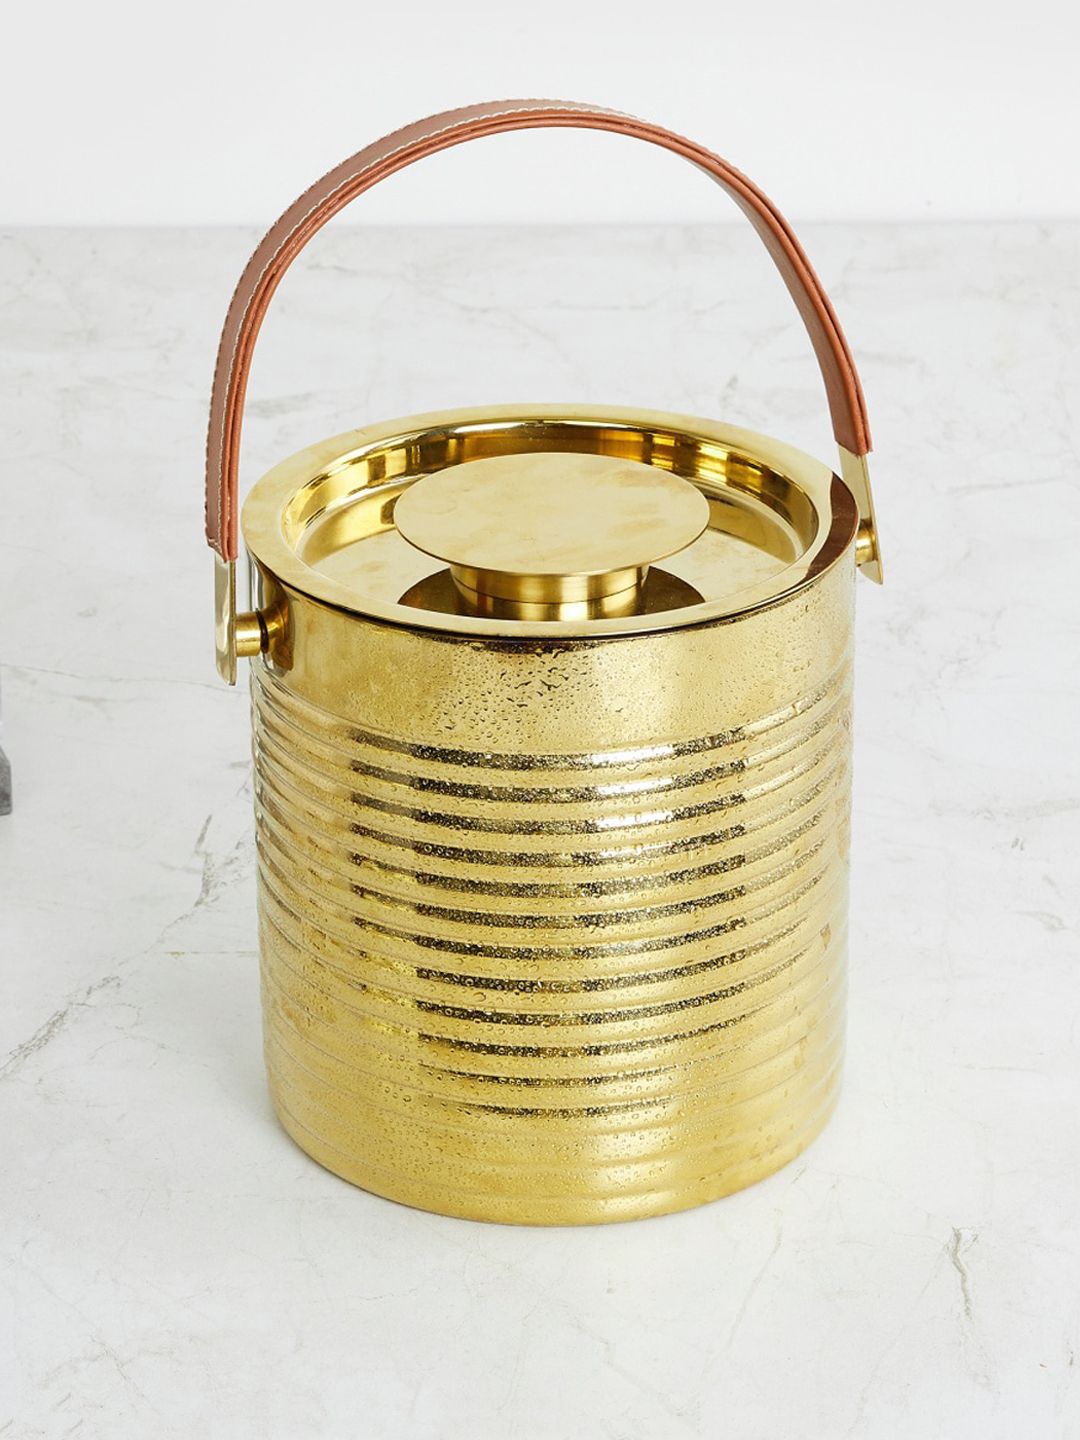 Home Centre Gold-Toned Stainless Steel Ribbed Leatherette Handle Ice Bucket - 2.3L Price in India